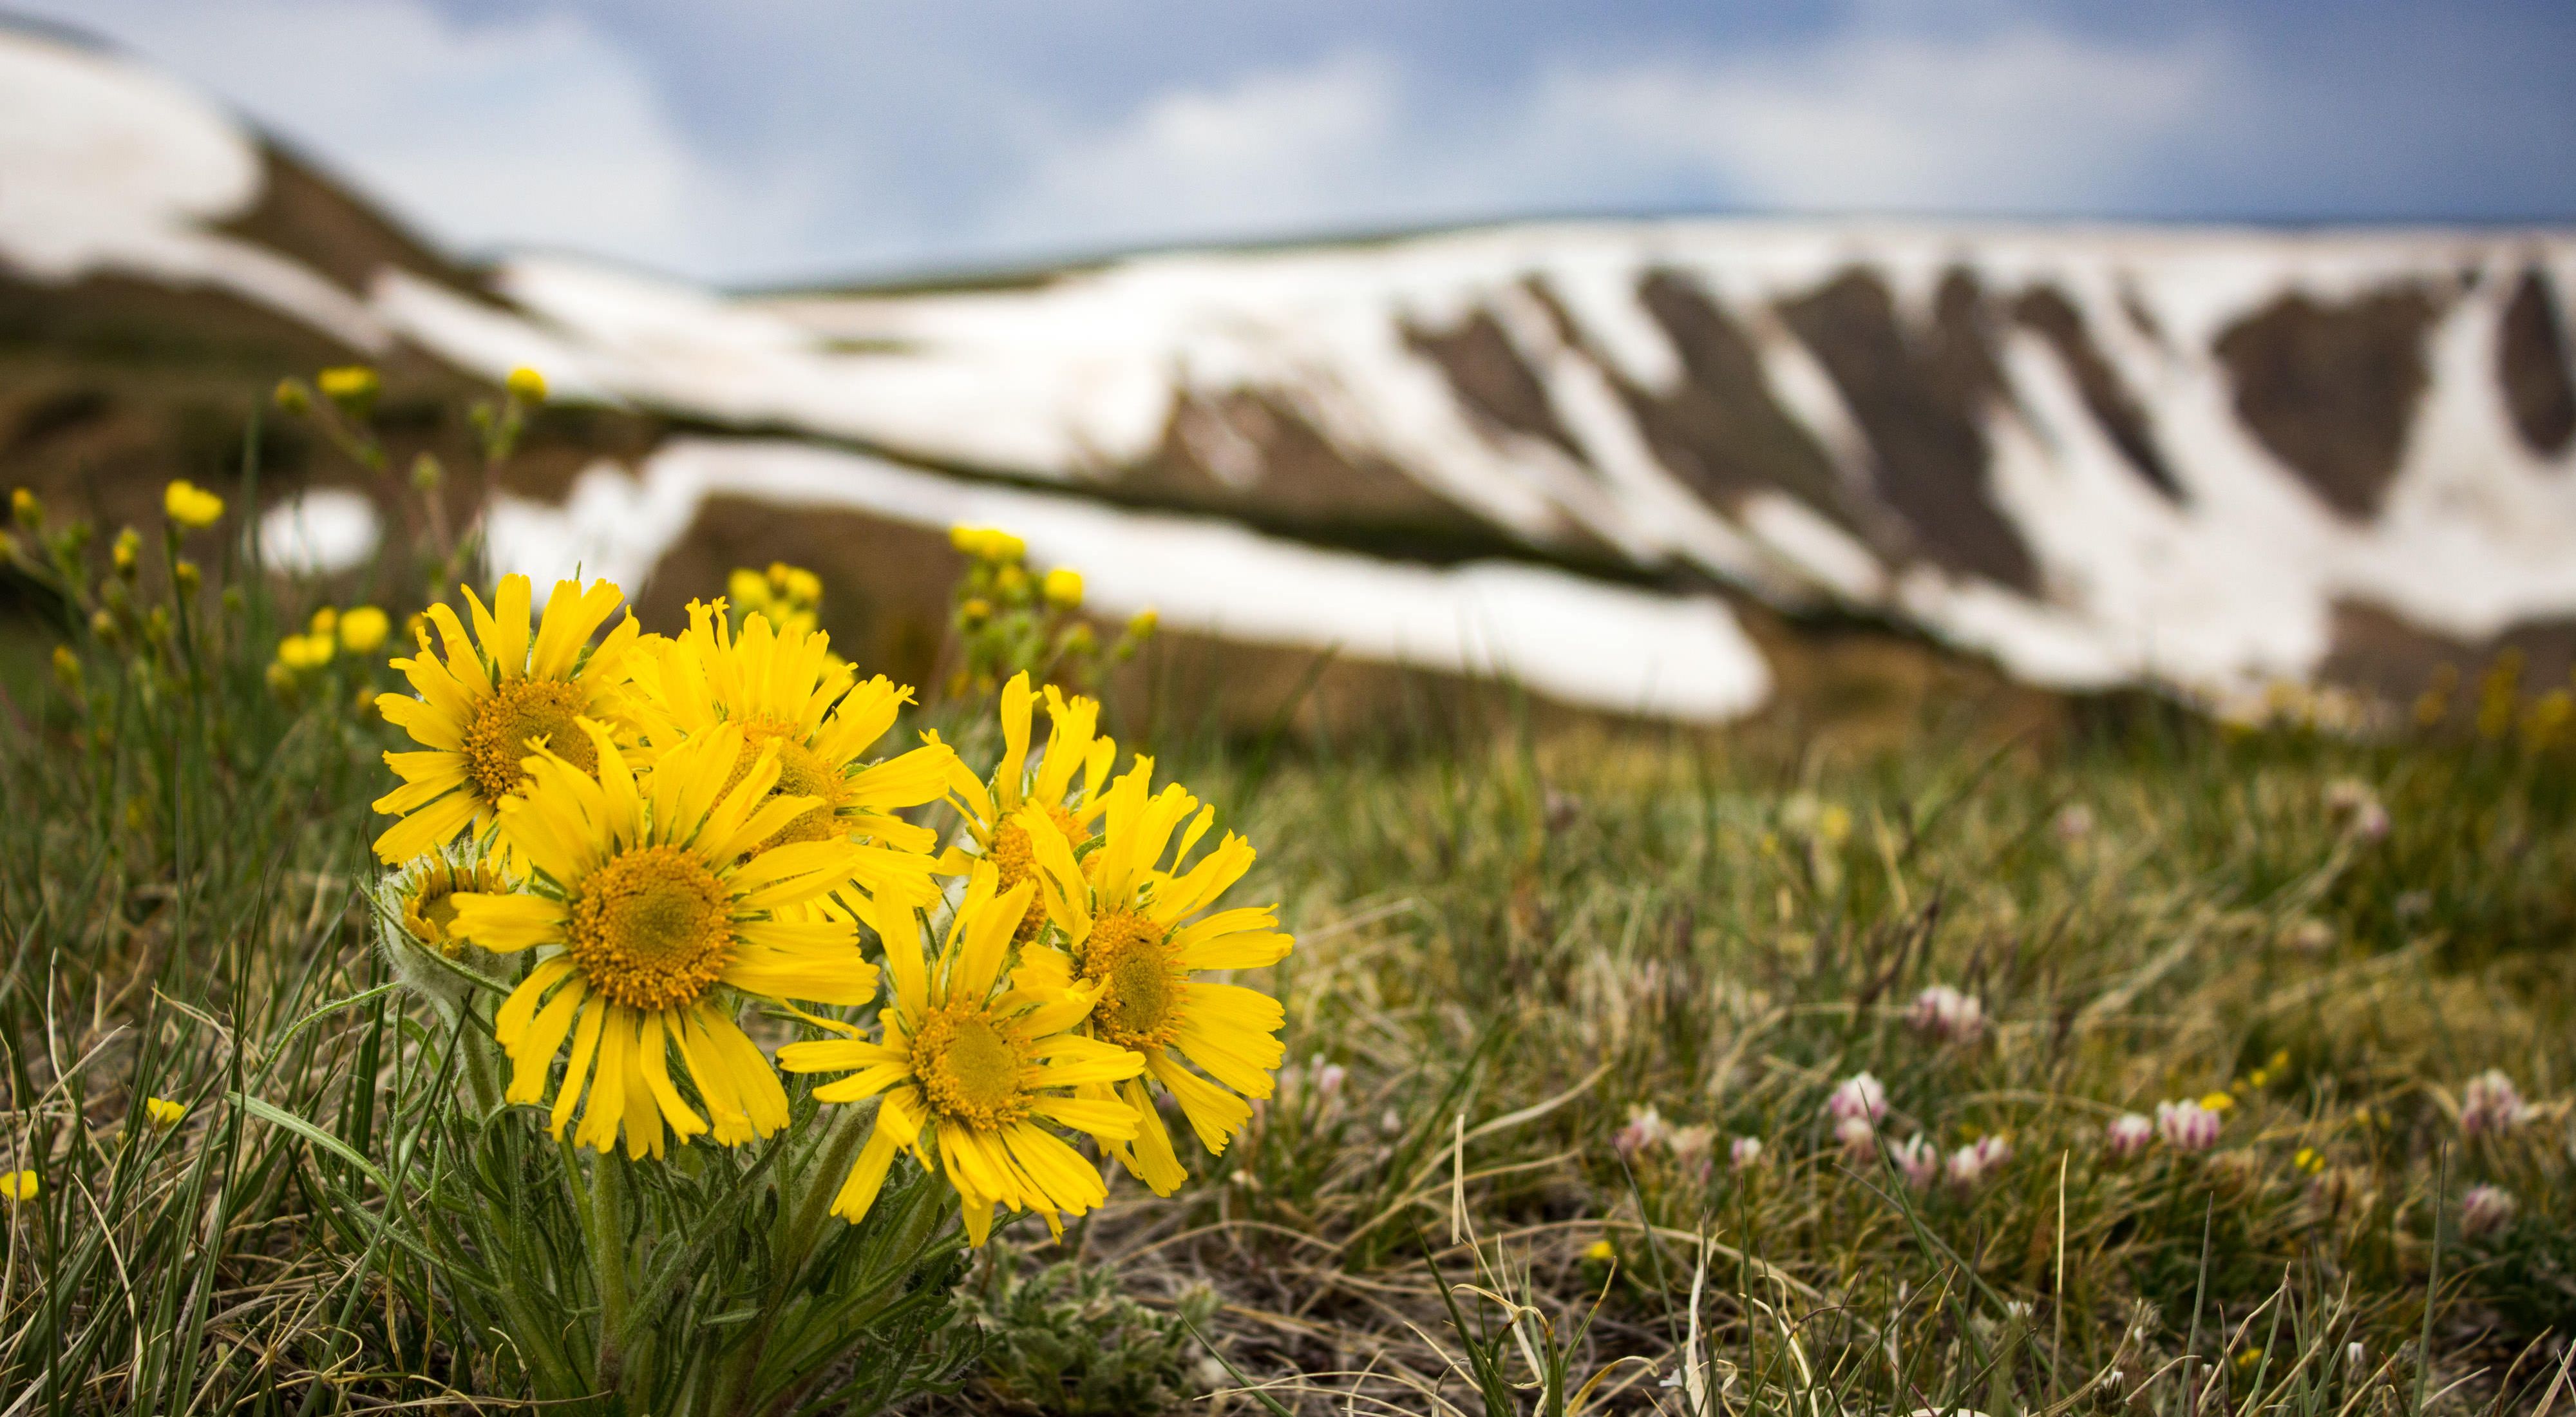 Yellow alpine sunflowers grow from the grass with snowcapped mountains in the background.